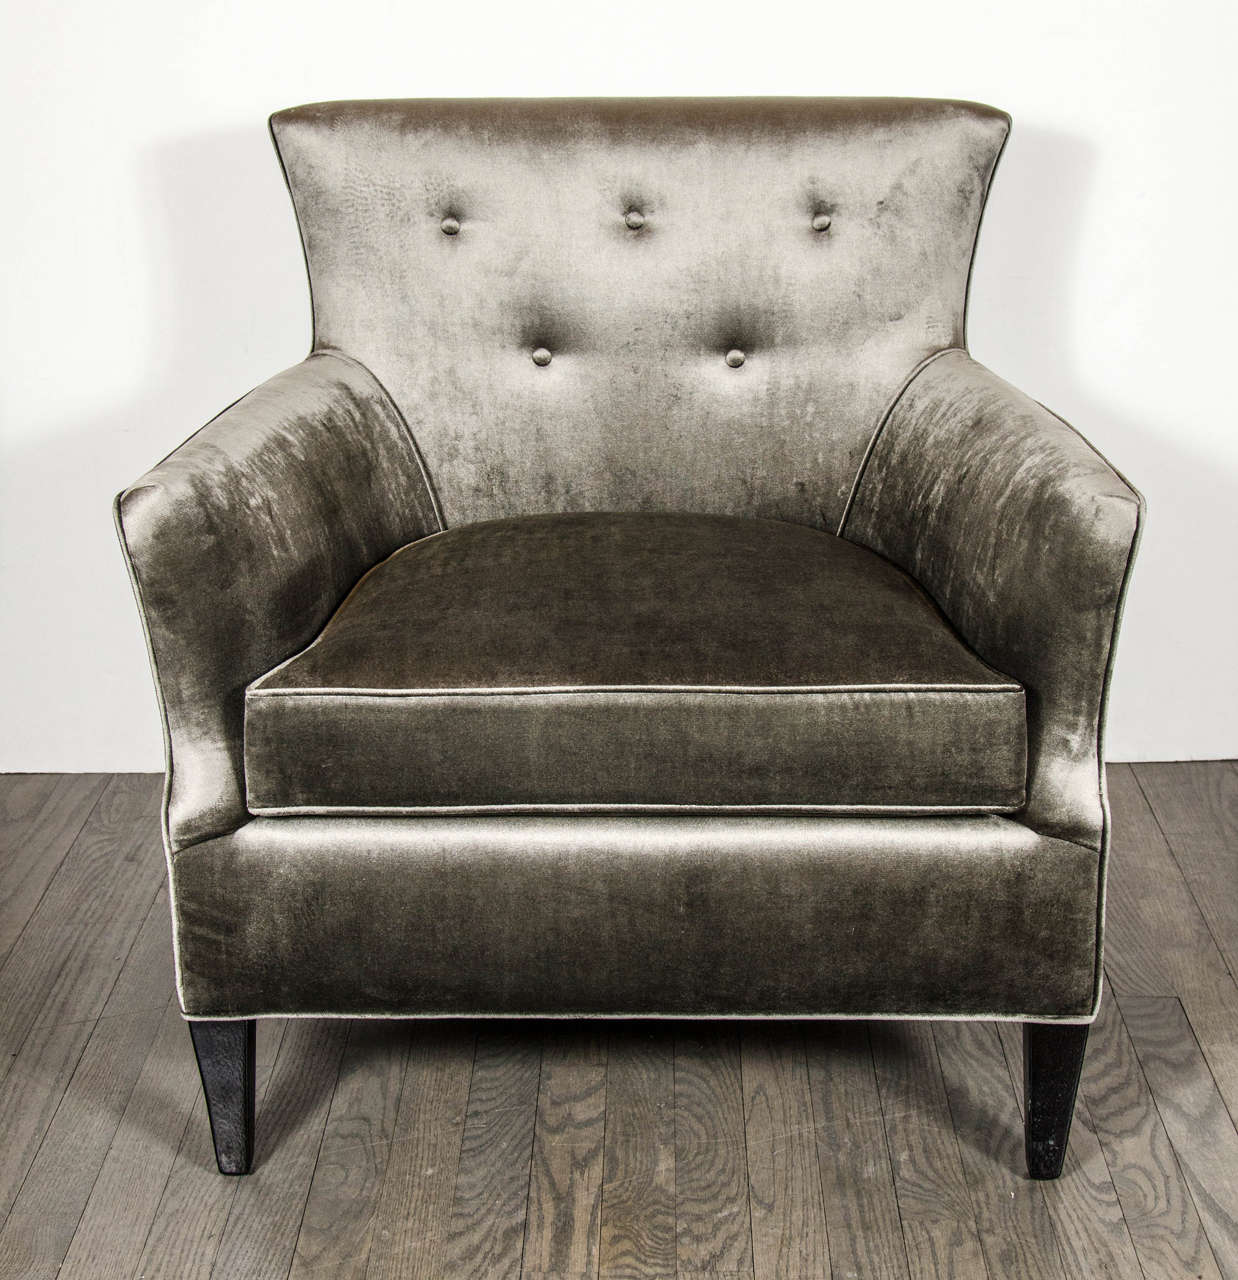 These elegant chairs feature classic mid-century design with tapered sleigh arm design and ebonized walnut legs. The chairs also feature button back detailing and are newly upholstered in smoked pewter velvet.These chairs have been restored to mint